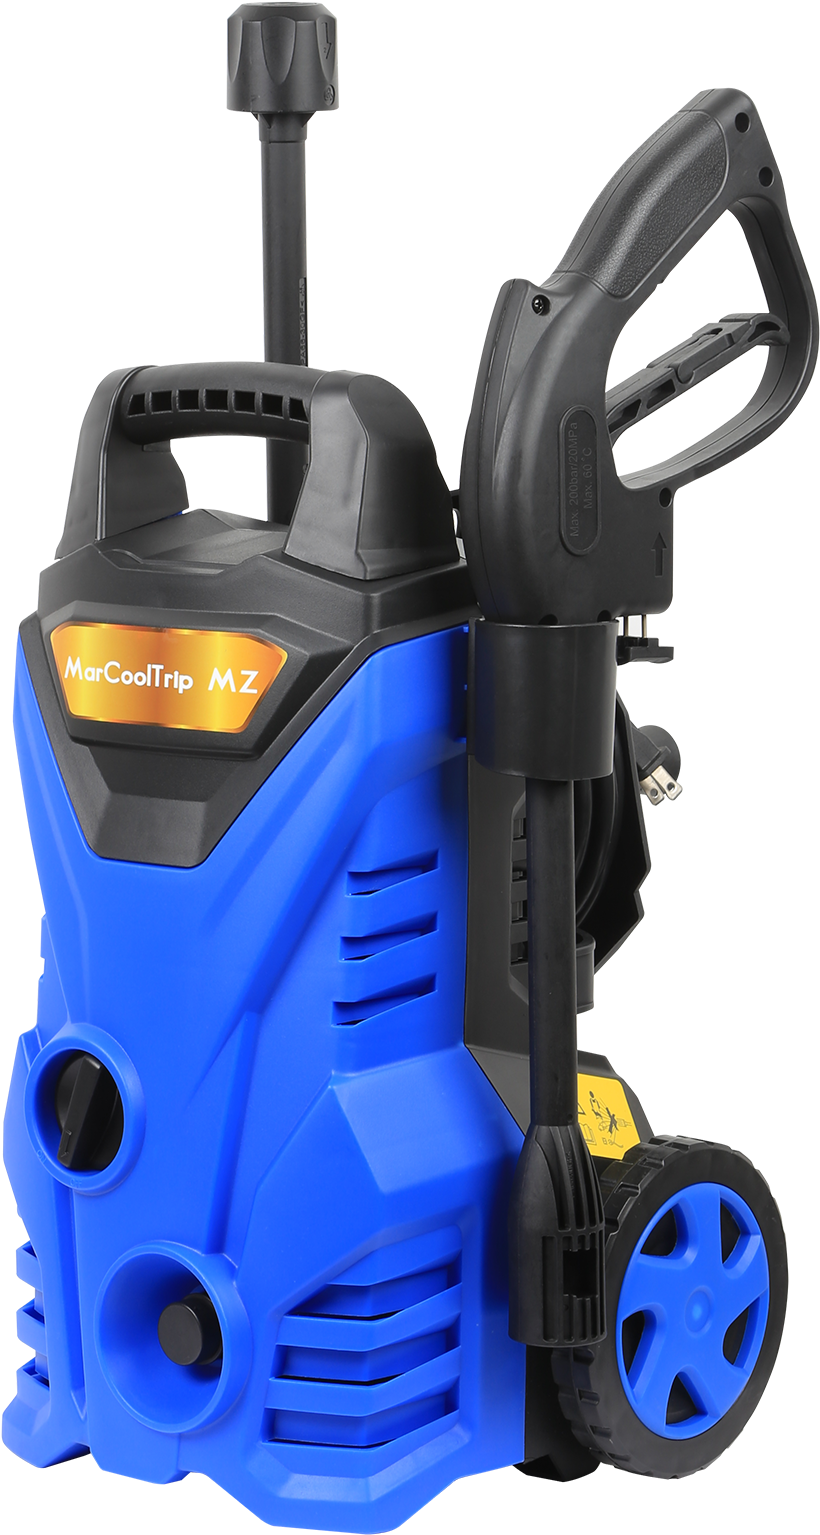 A Blue And Black Pressure Washer